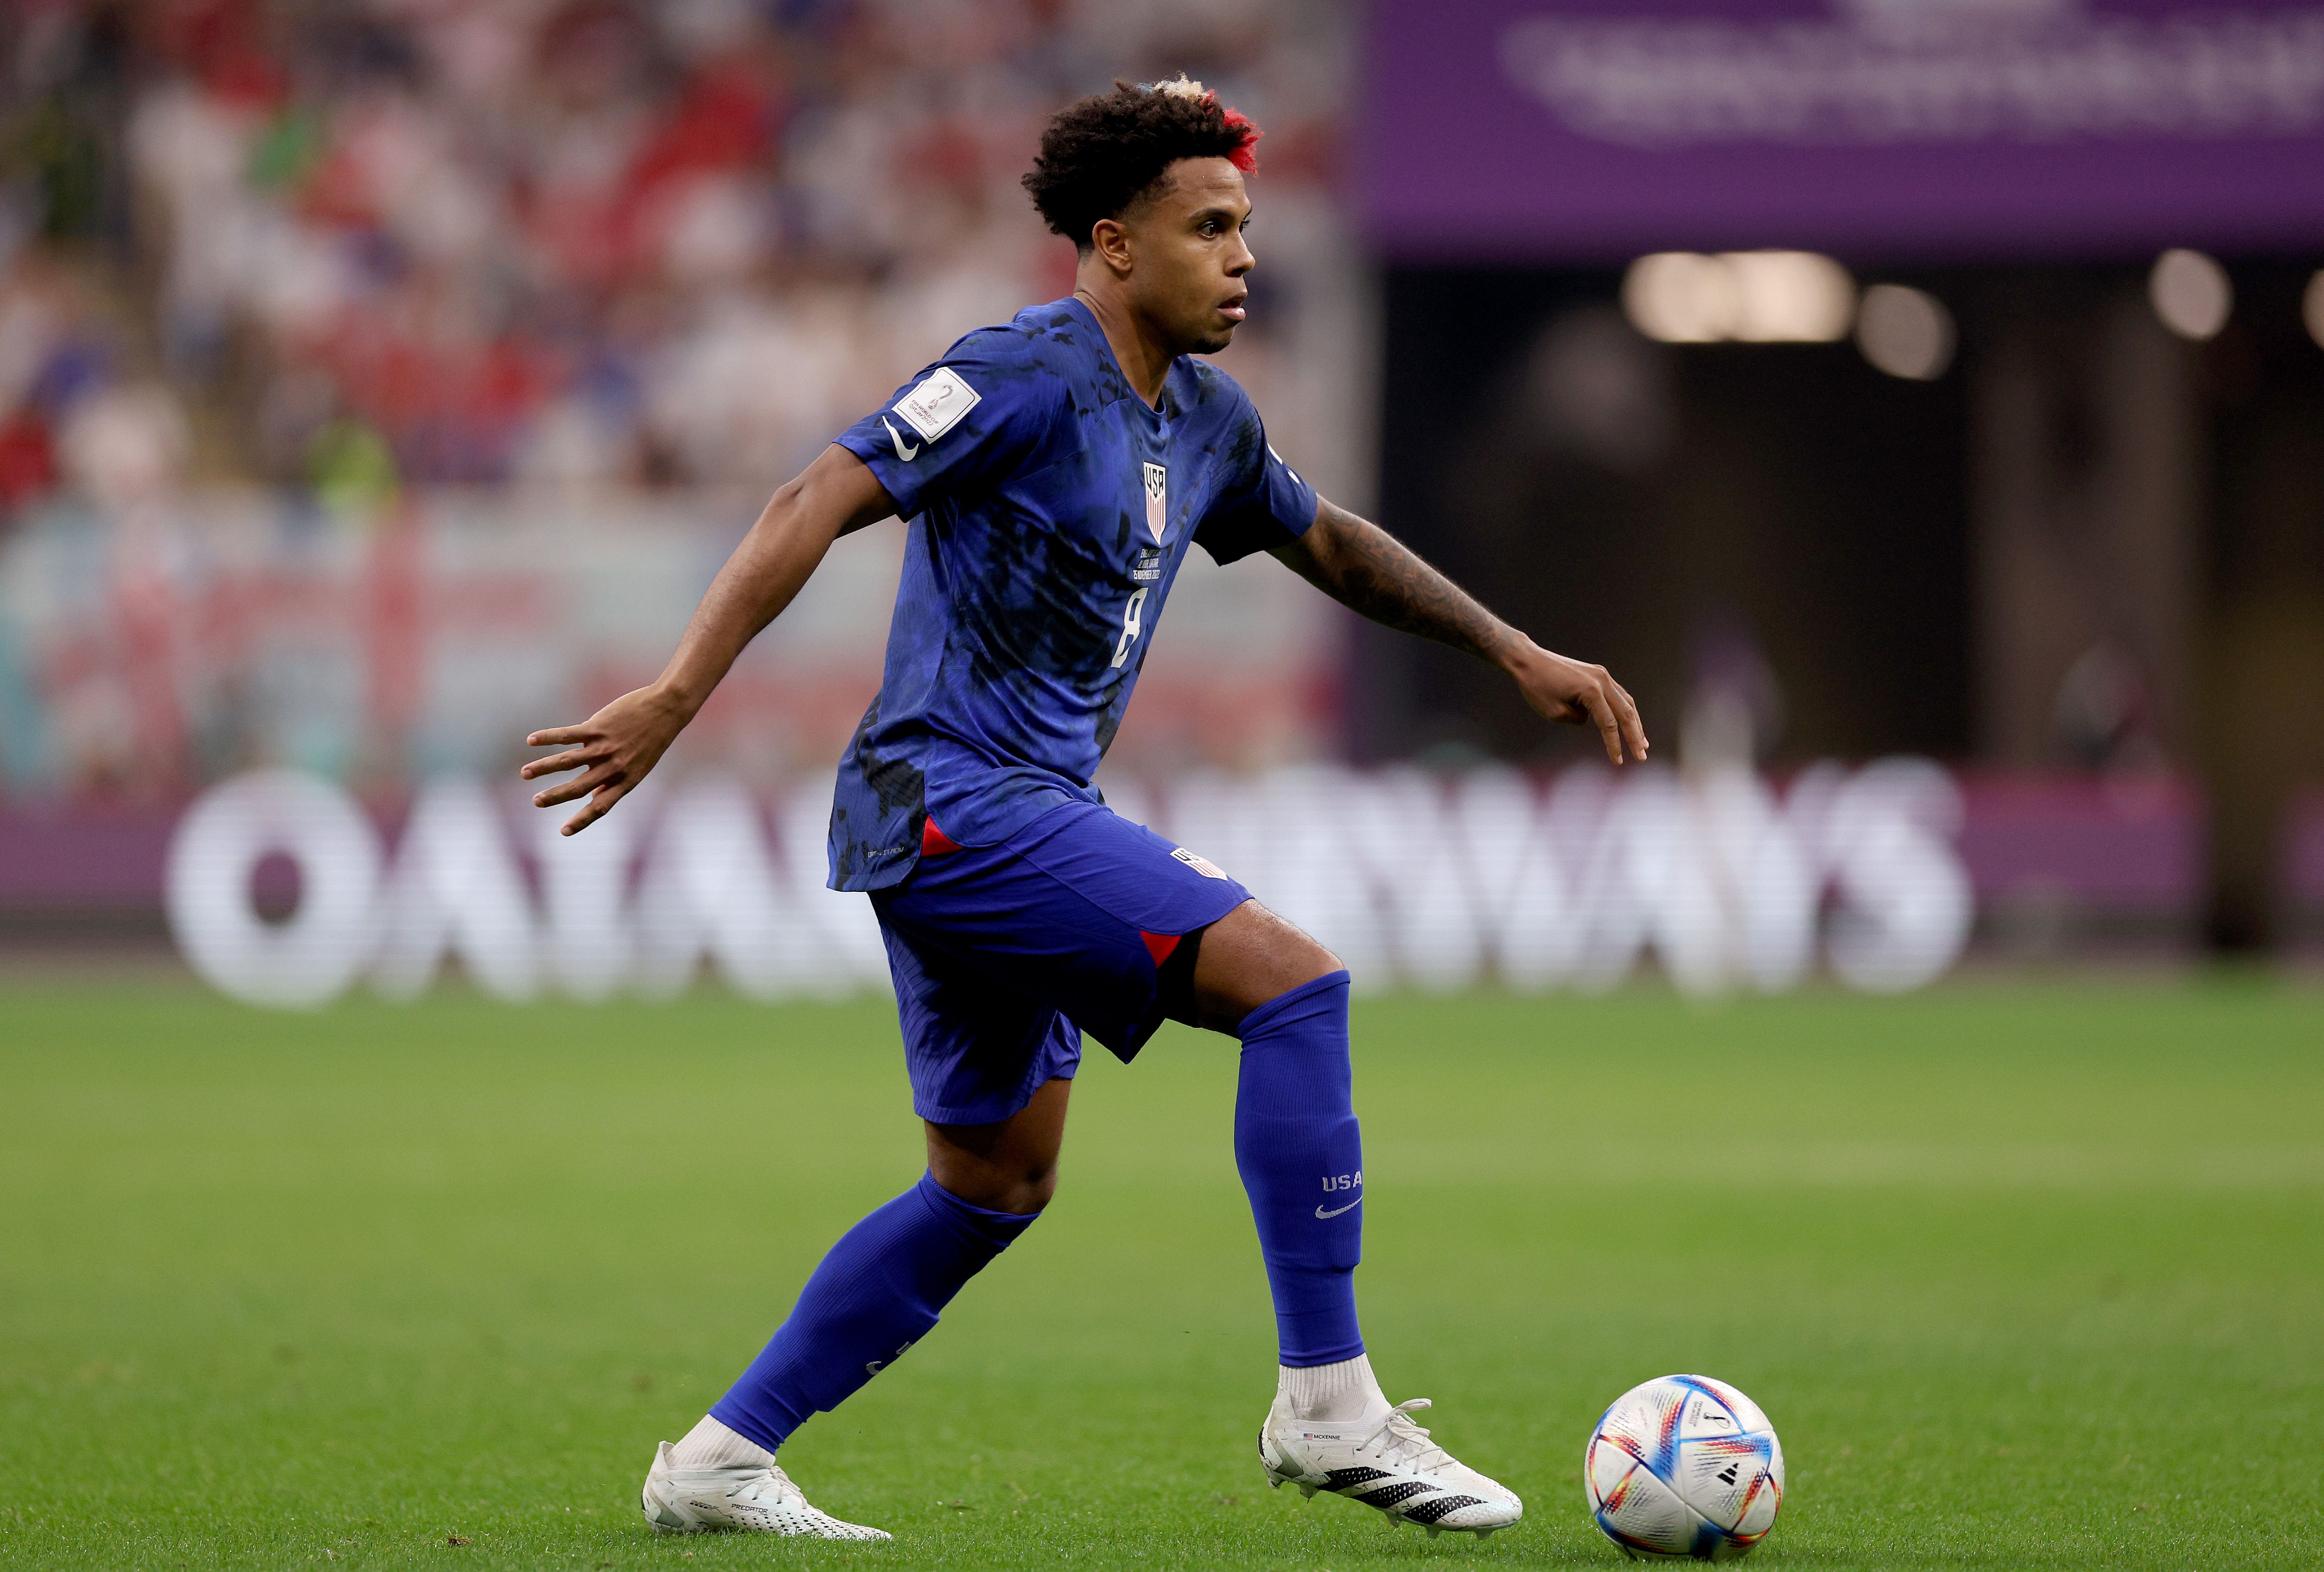 Weston McKennie #8 of United States takes the ball in the second half